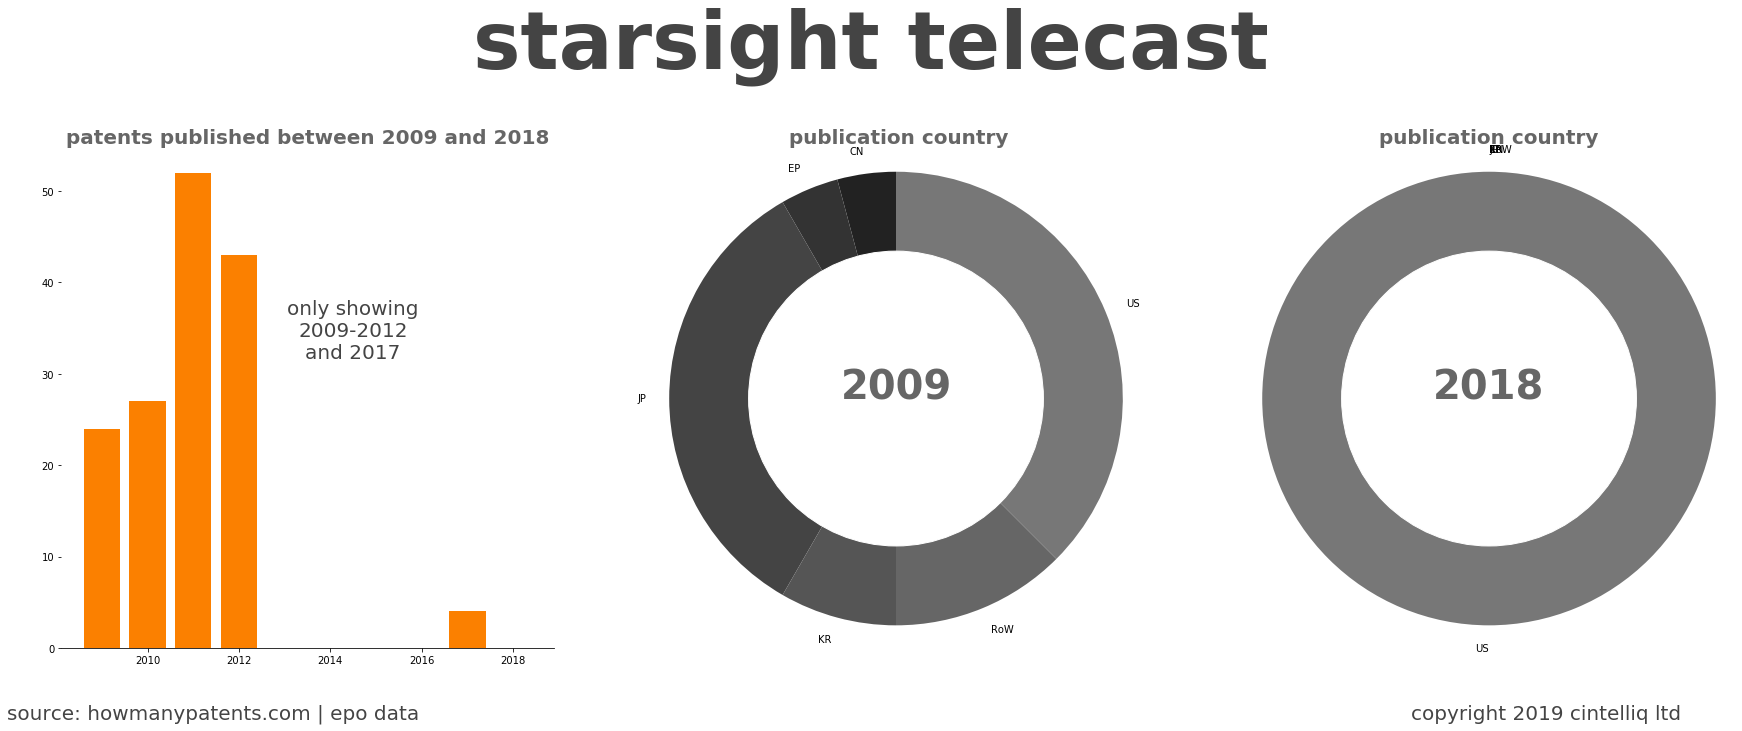 summary of patents for Starsight Telecast